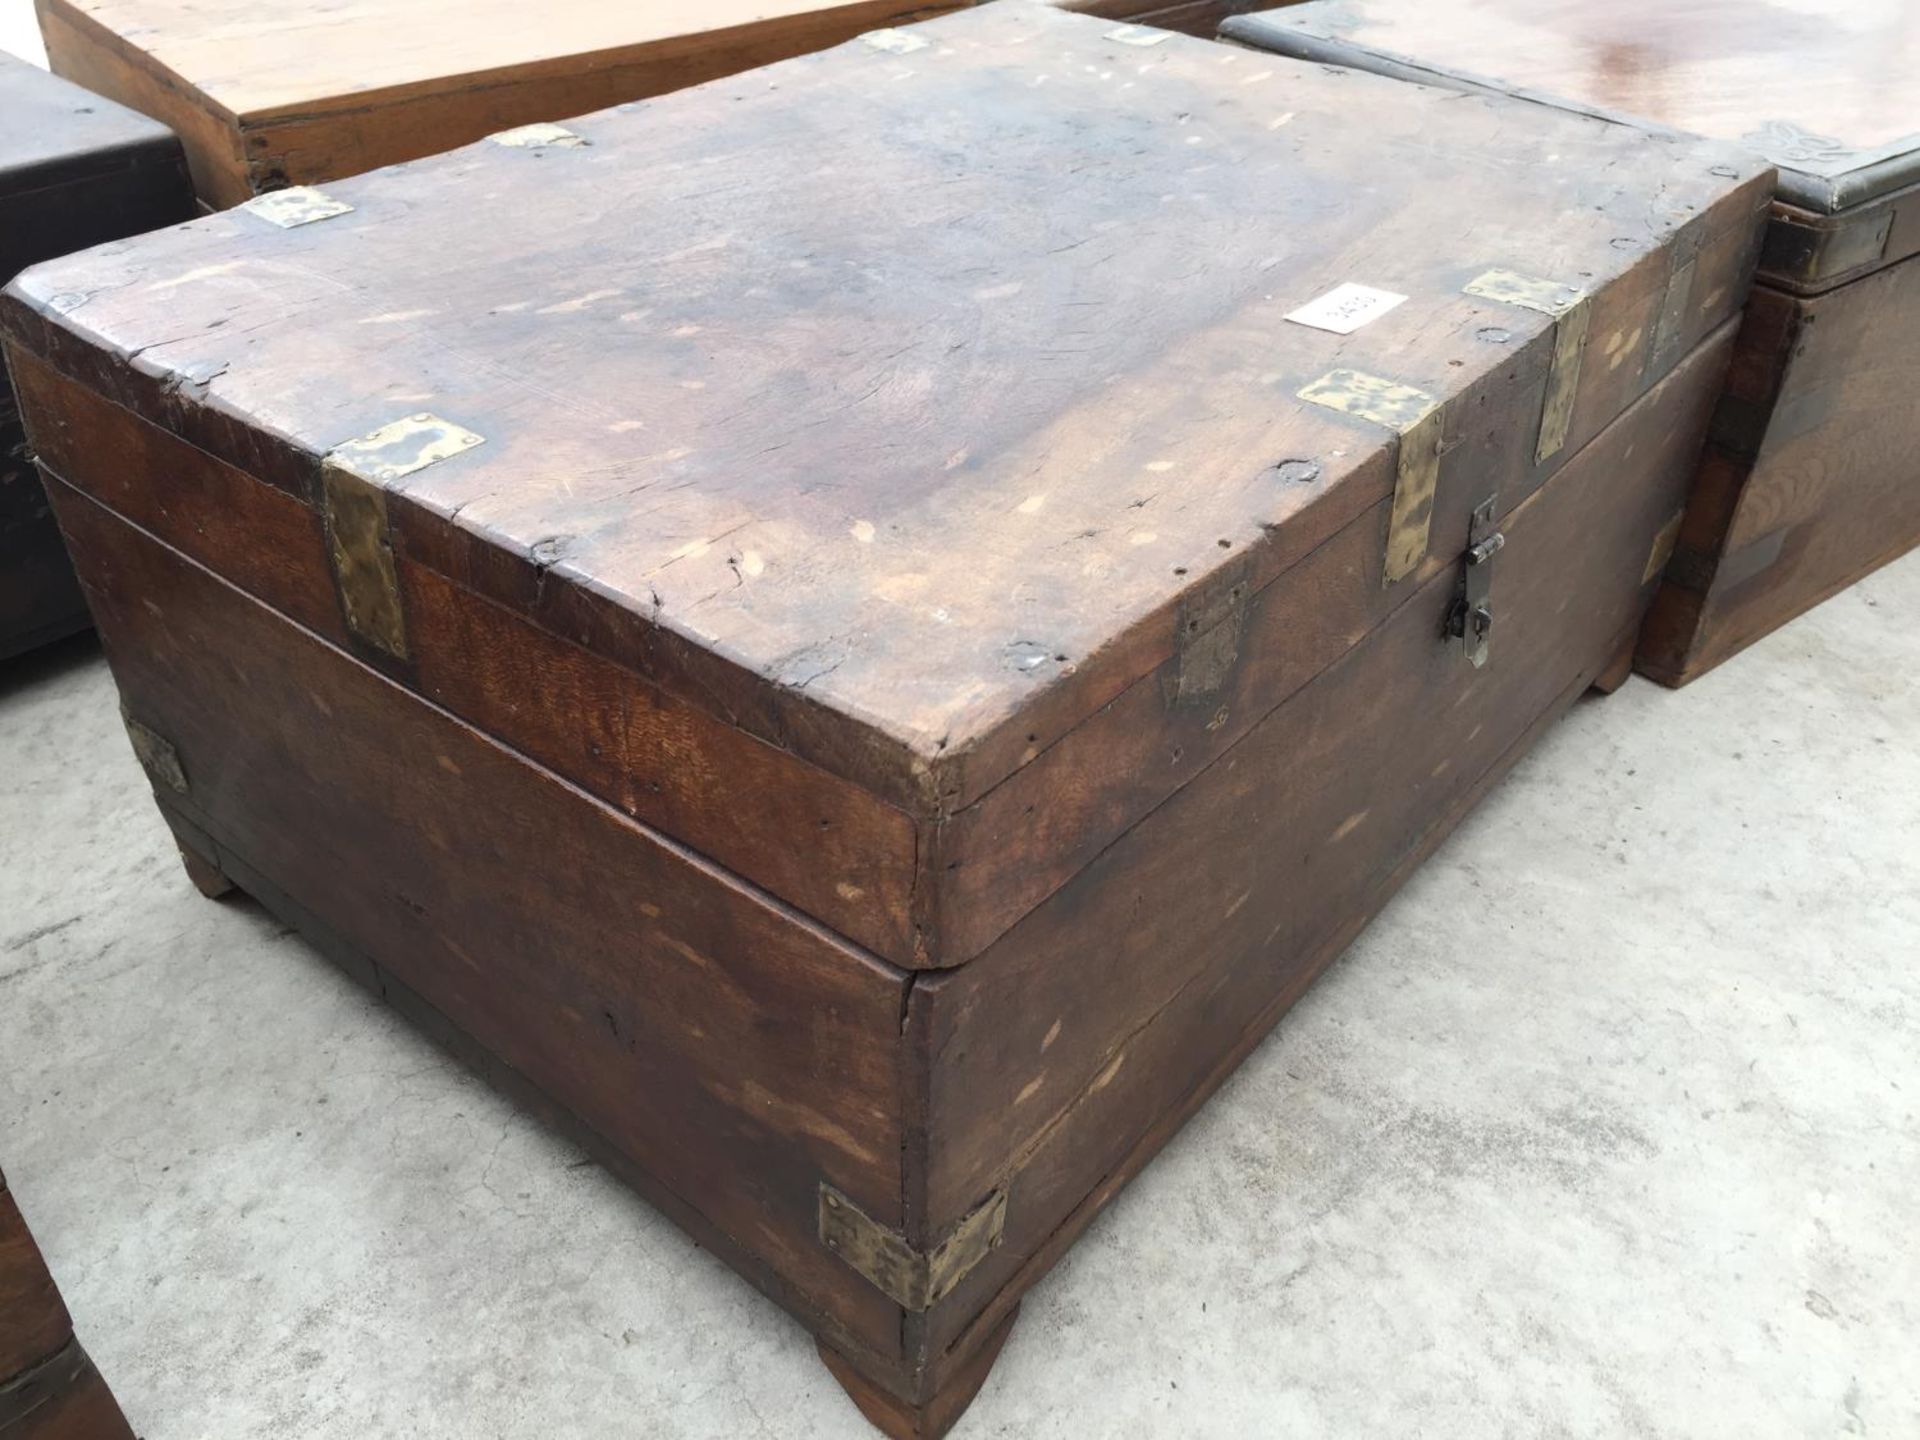 AN INDIAN HARDWOOD BOX WITH BRASS CLASP + DECORATION, 19" WIDE - Image 2 of 3